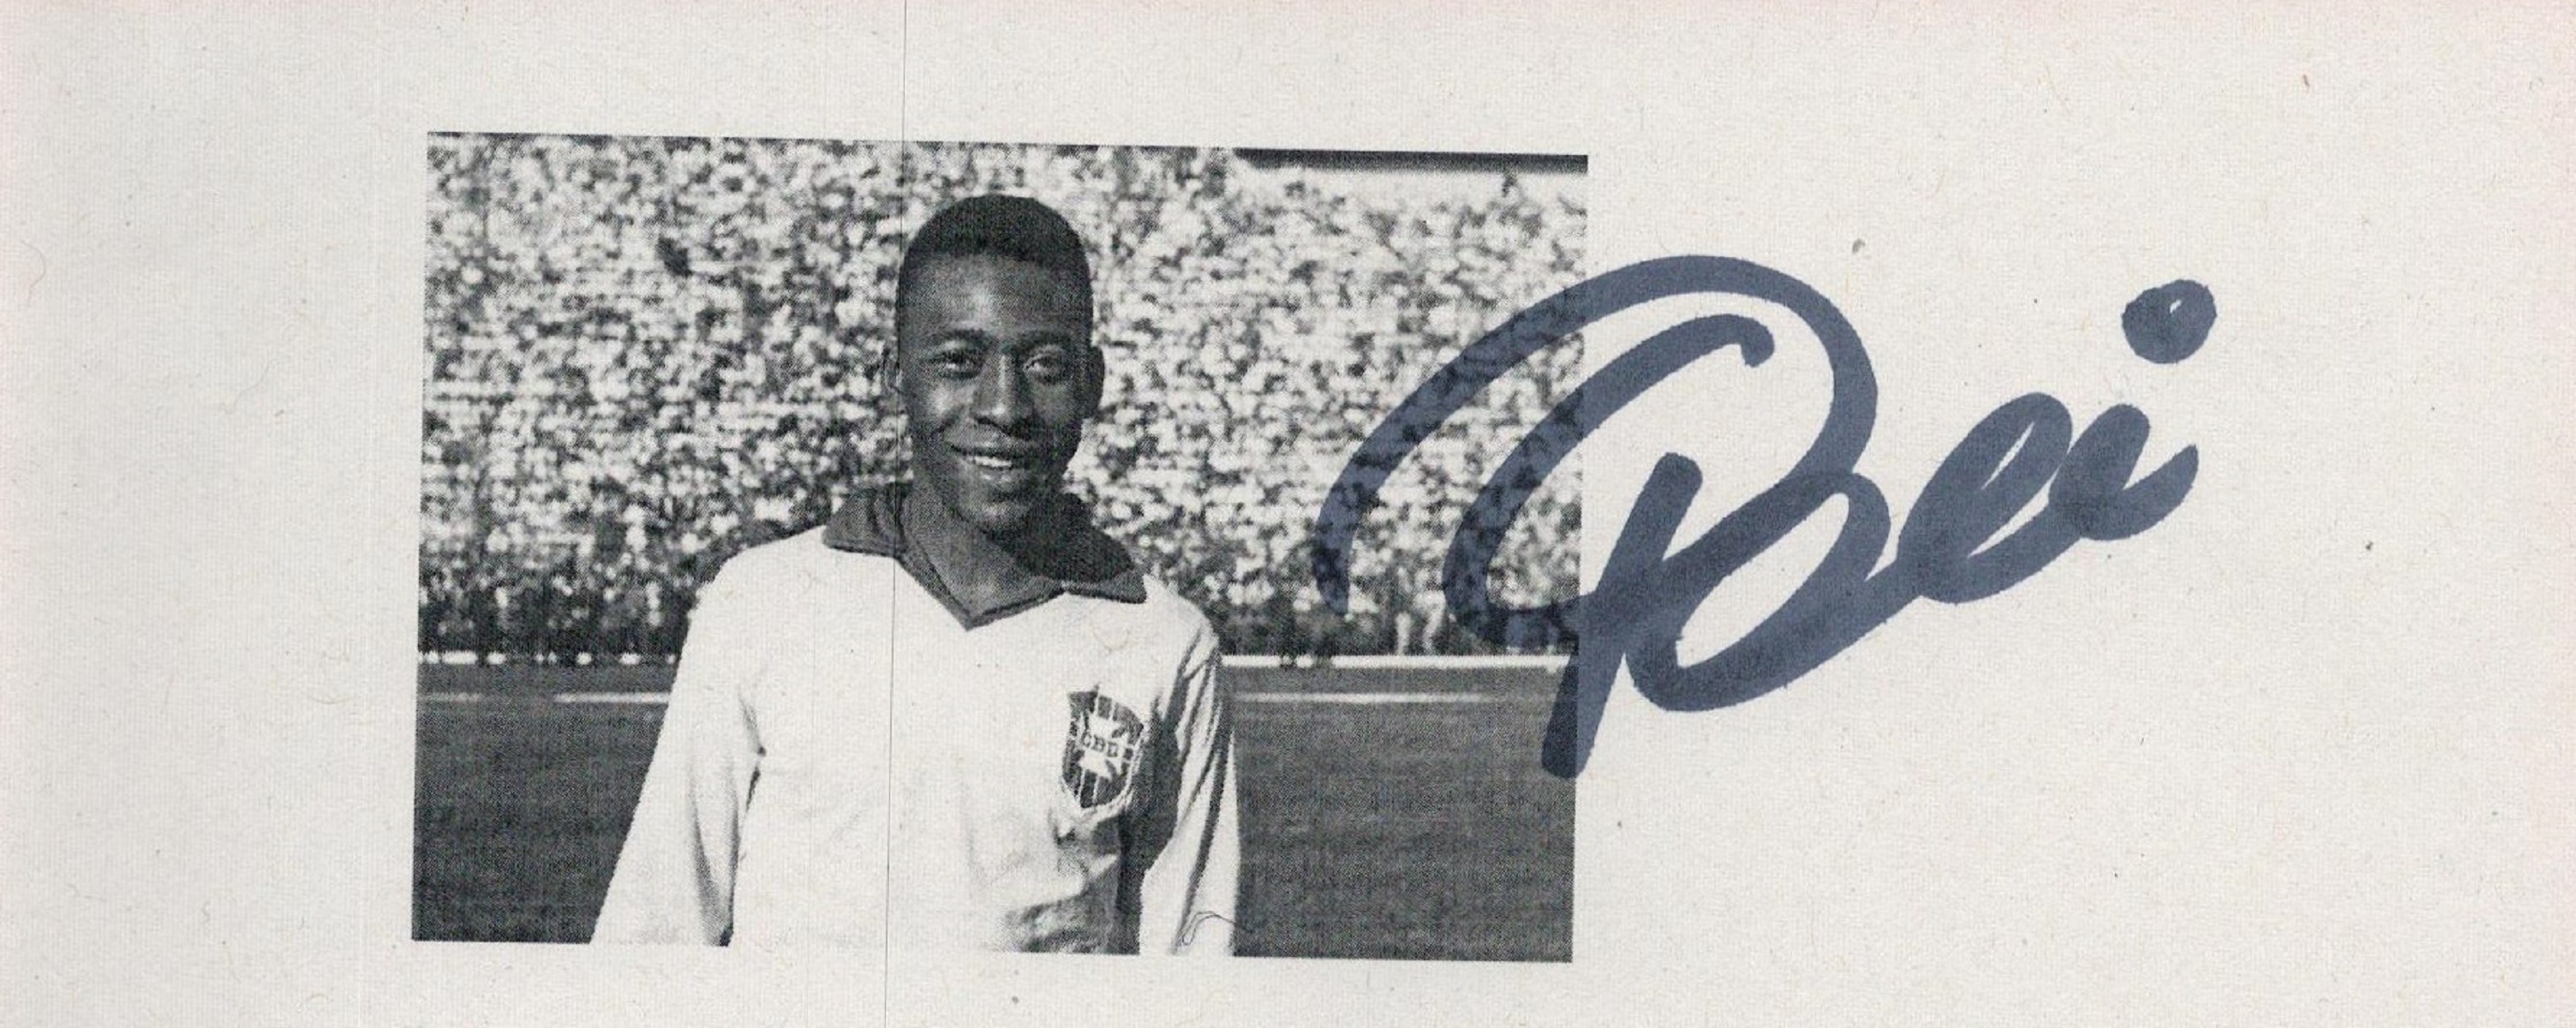 Pele Brazil Football Legend Signed Page With Picture. Good condition. All autographs come with a